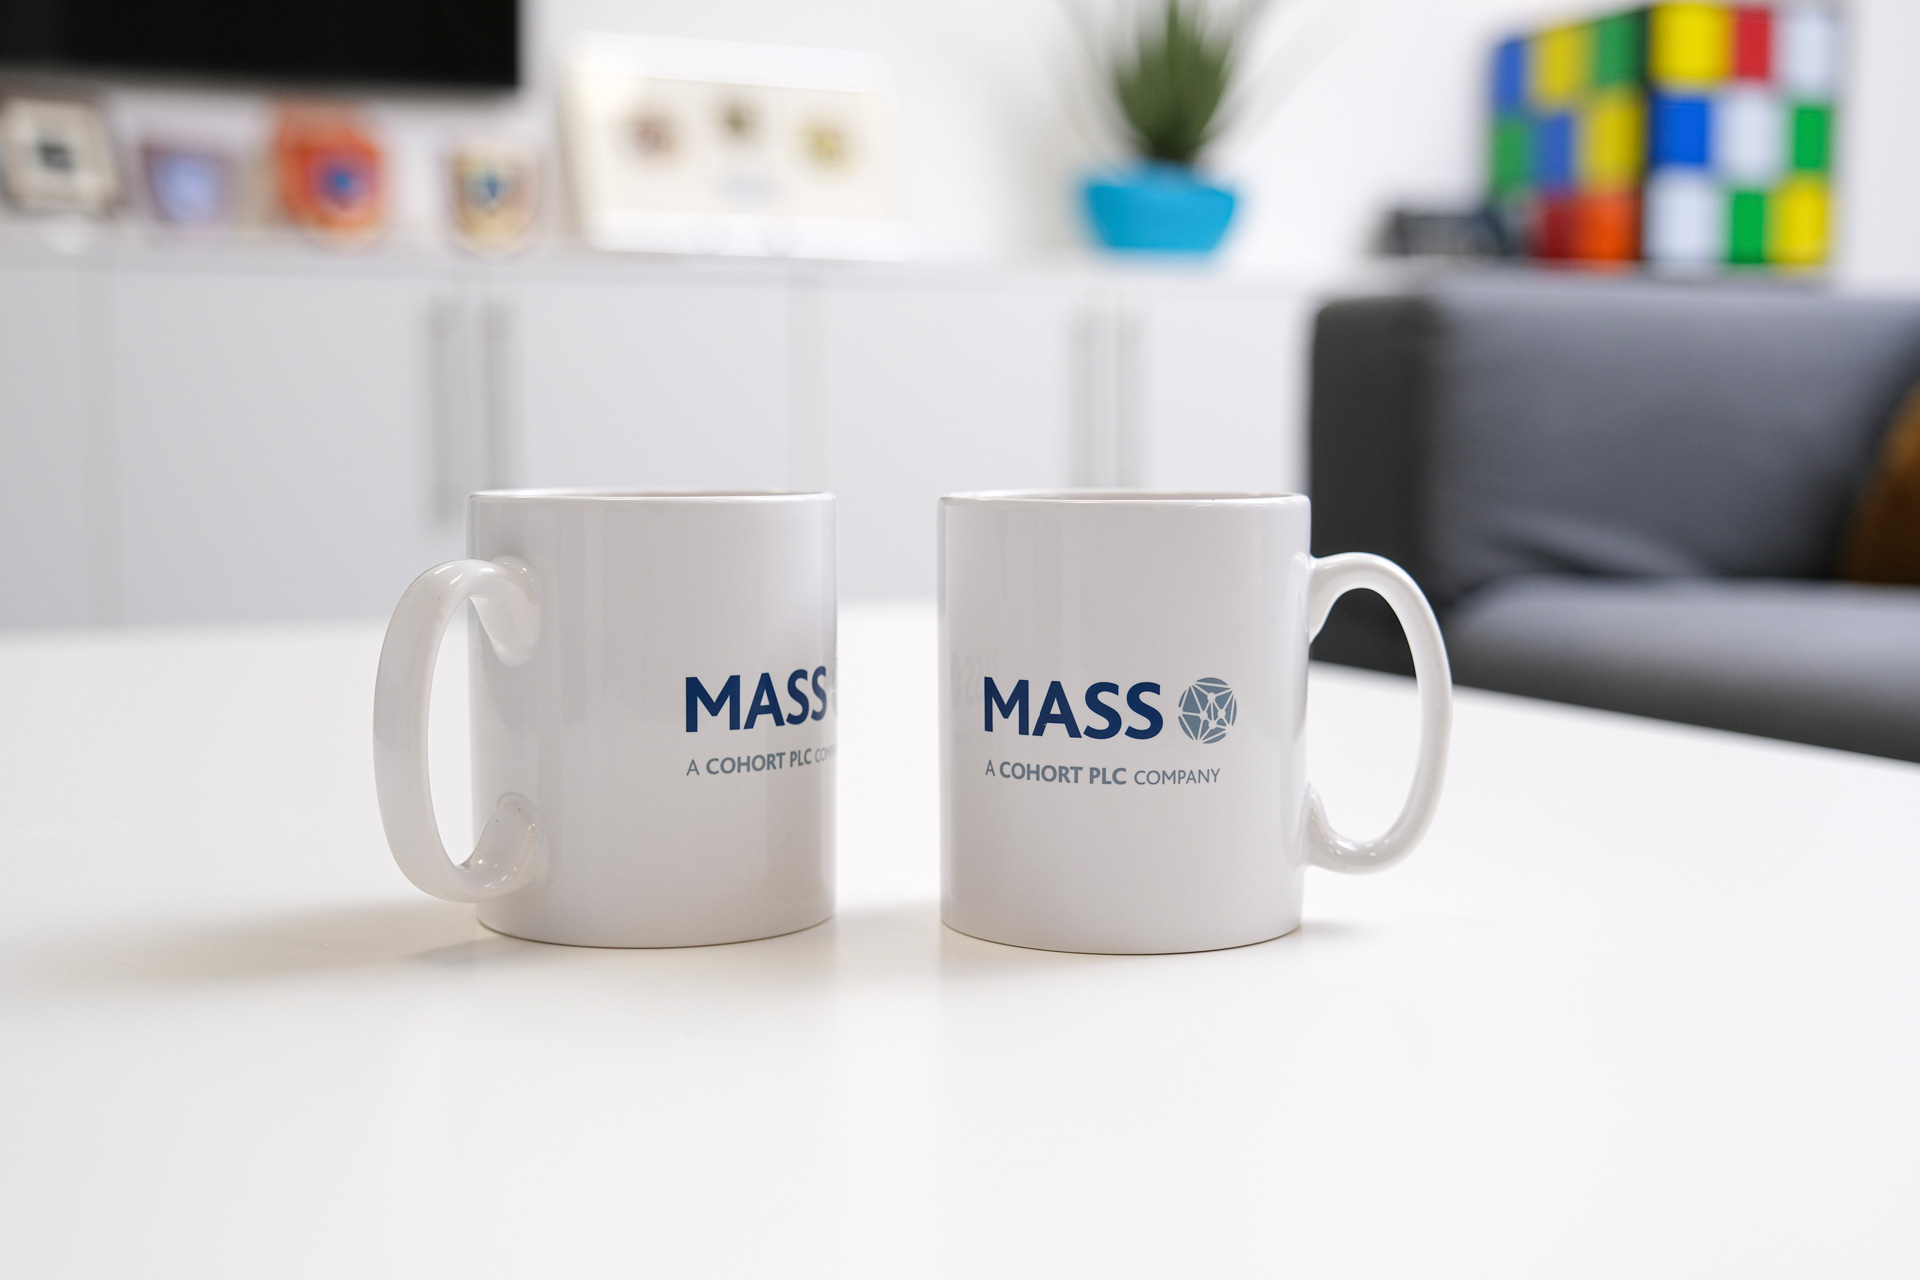 MASS branded cups